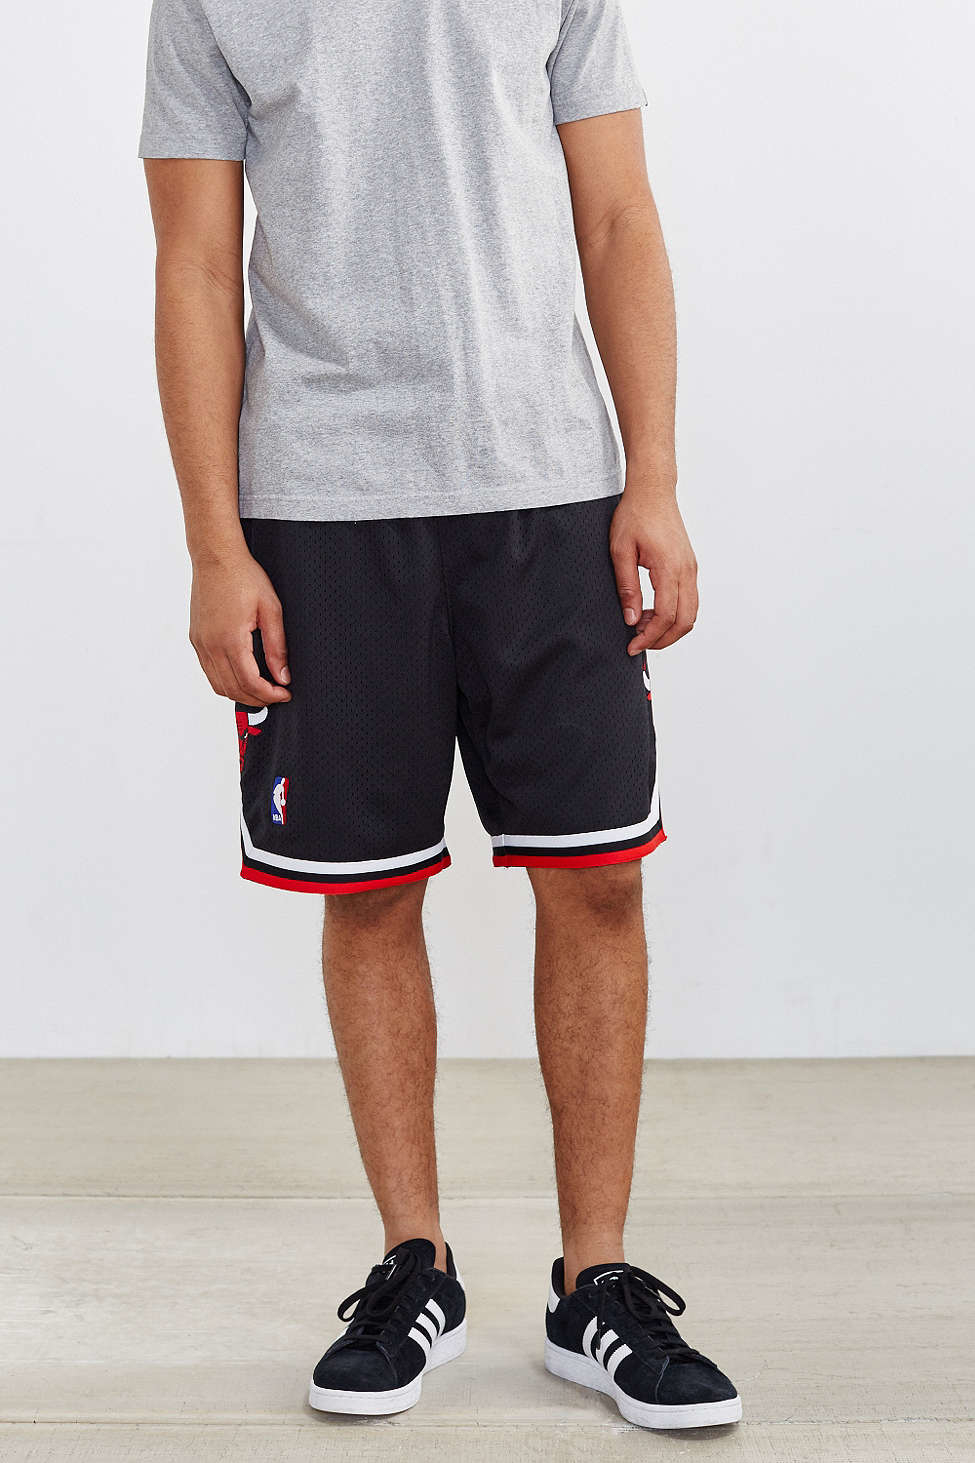 Mitchell & Ness Chicago Bulls Authentic Basketball Short in Black 